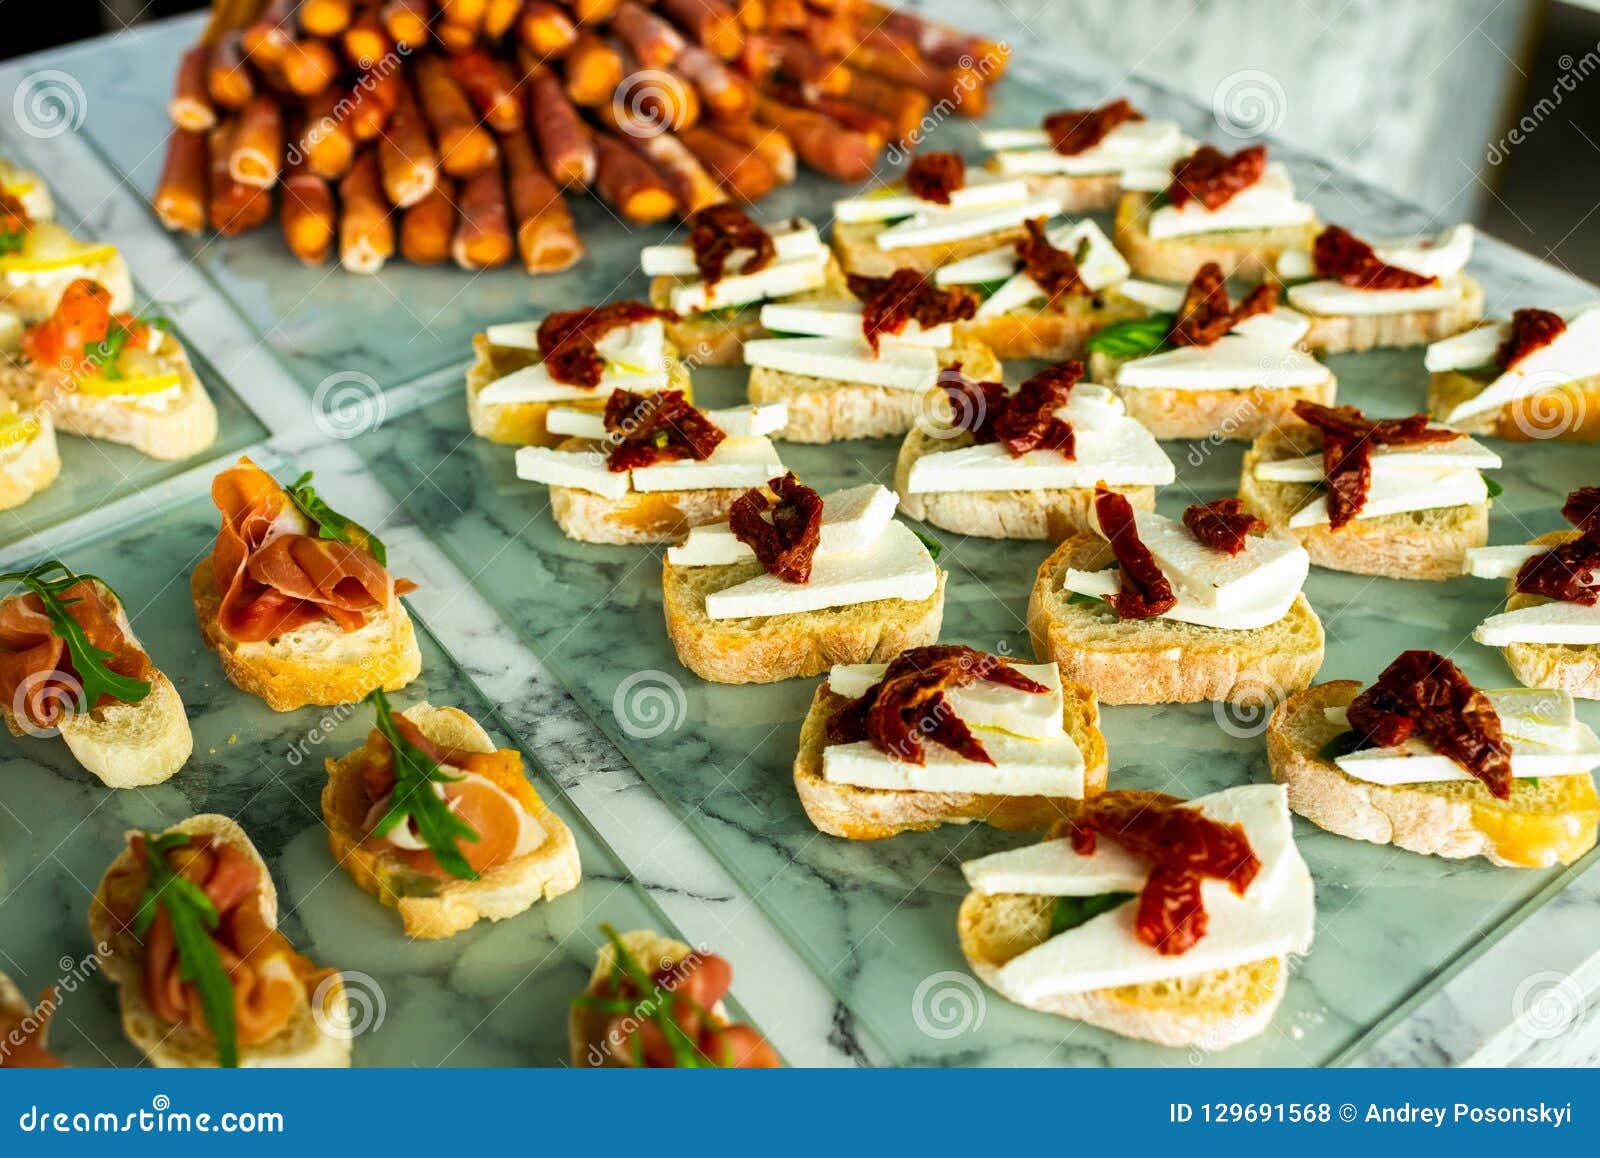 Cold snacks for guests stock photo. Image of cheese ...